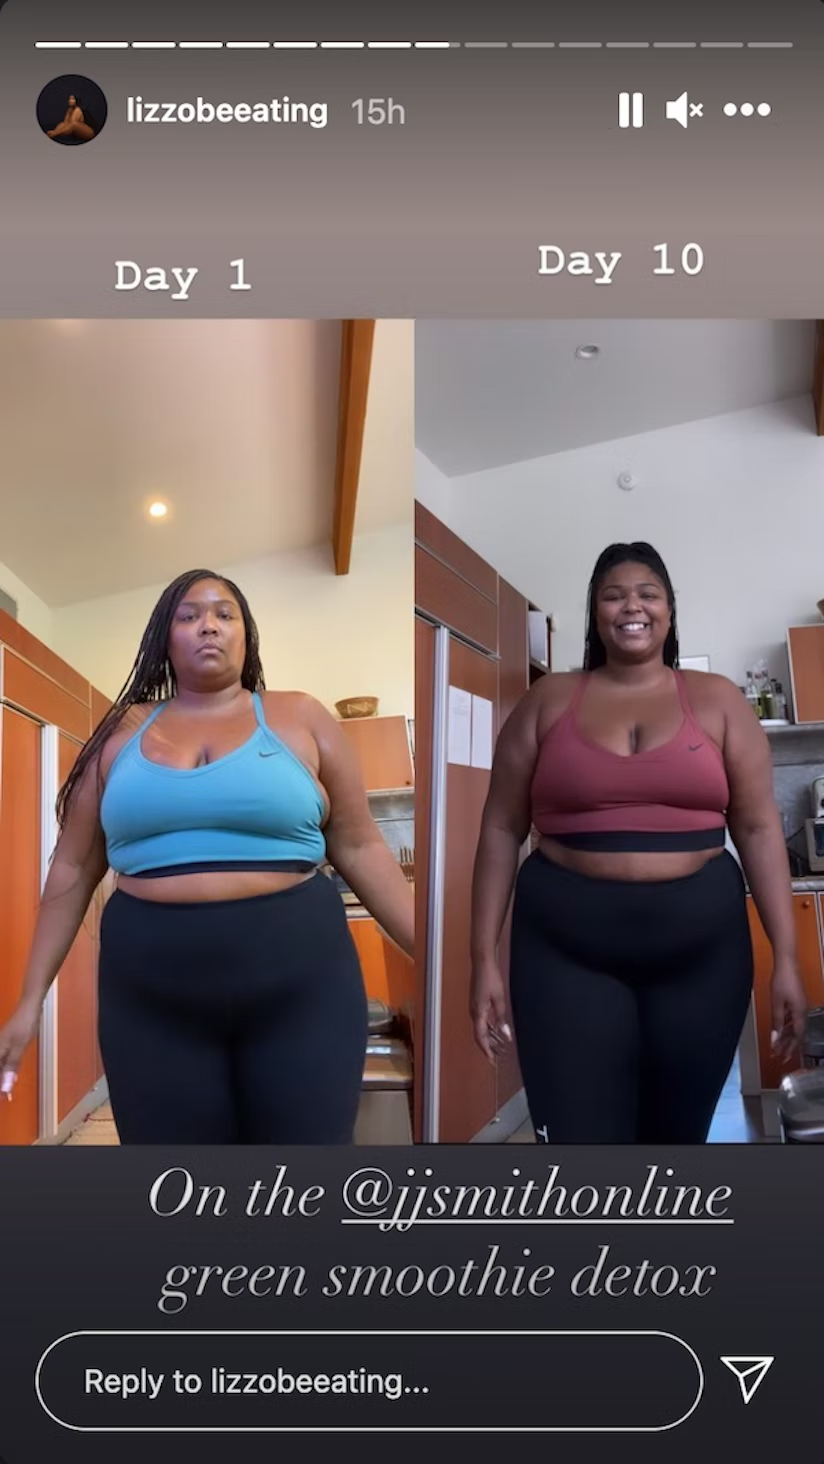 Lizzo's before and after photos during weight loss journey.